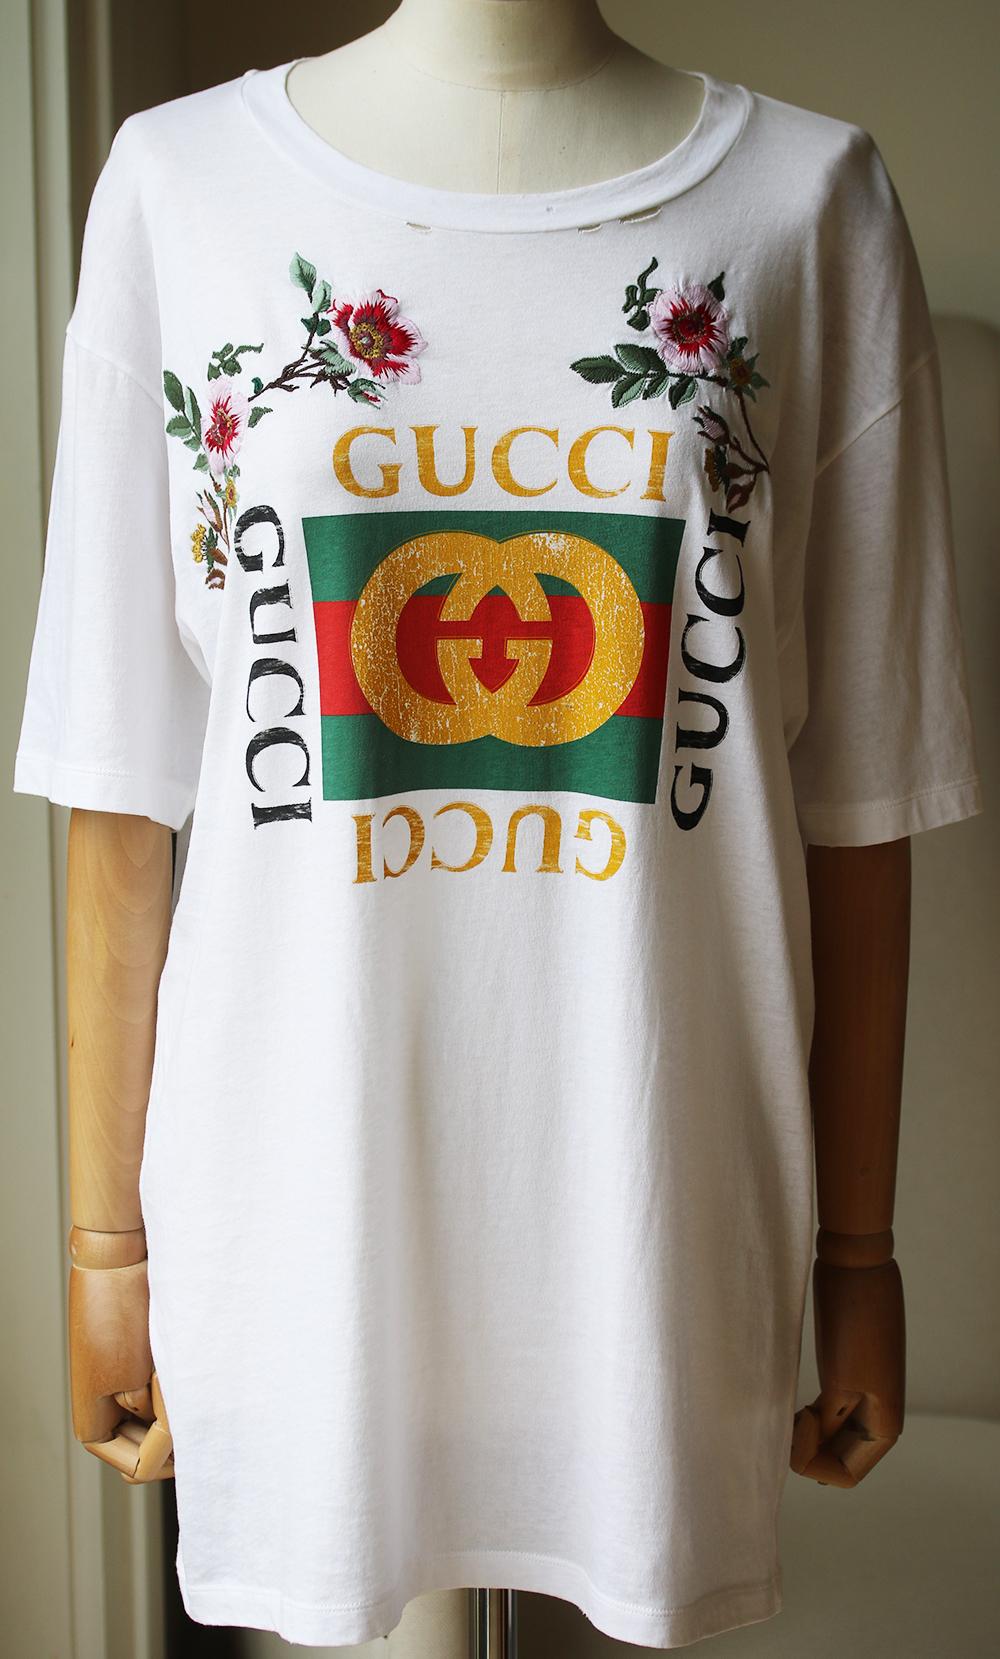 Round neck, short sleeves. Distressed-effect logo-print front, floral embroidery. Slip on. Relaxed-fitting style. Lightweight cotton-jersey. Colour: white. 100% Cotton. Made in Italy. 

Size: Medium (UK 10, US 6, FR 38, IT 42)

Condition: As new